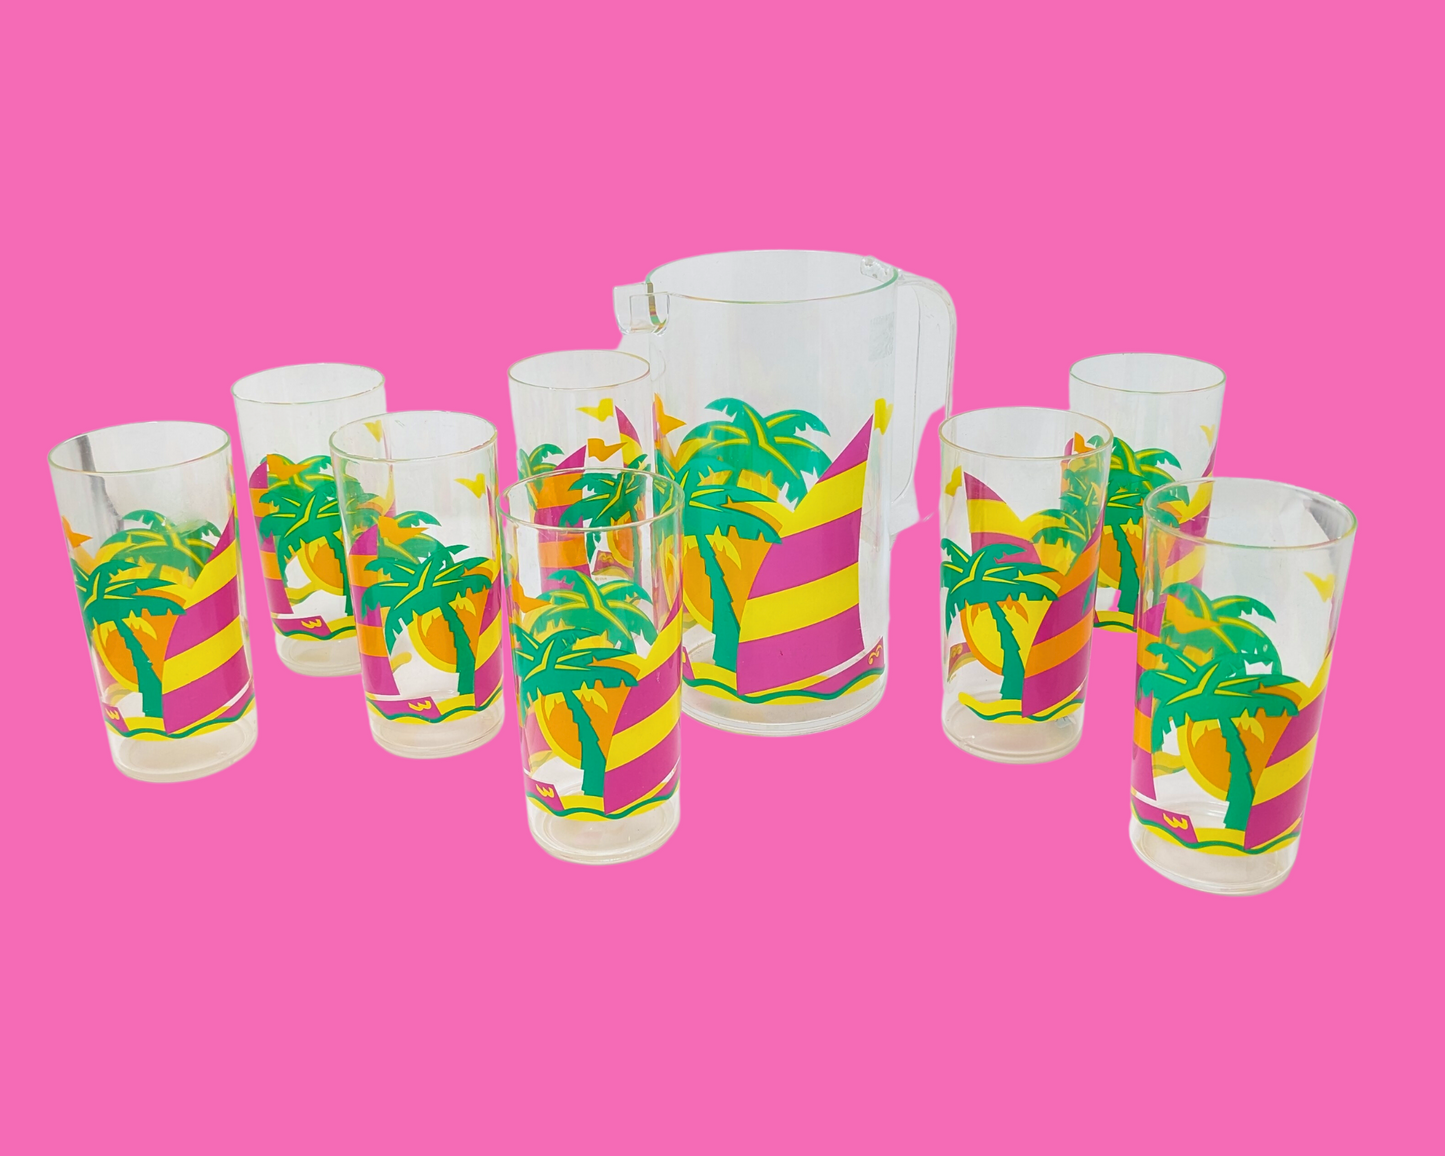 Vintage 1990's Exotic Design, Kitsch, 8 Plastic Glasses and Matching Pitcher